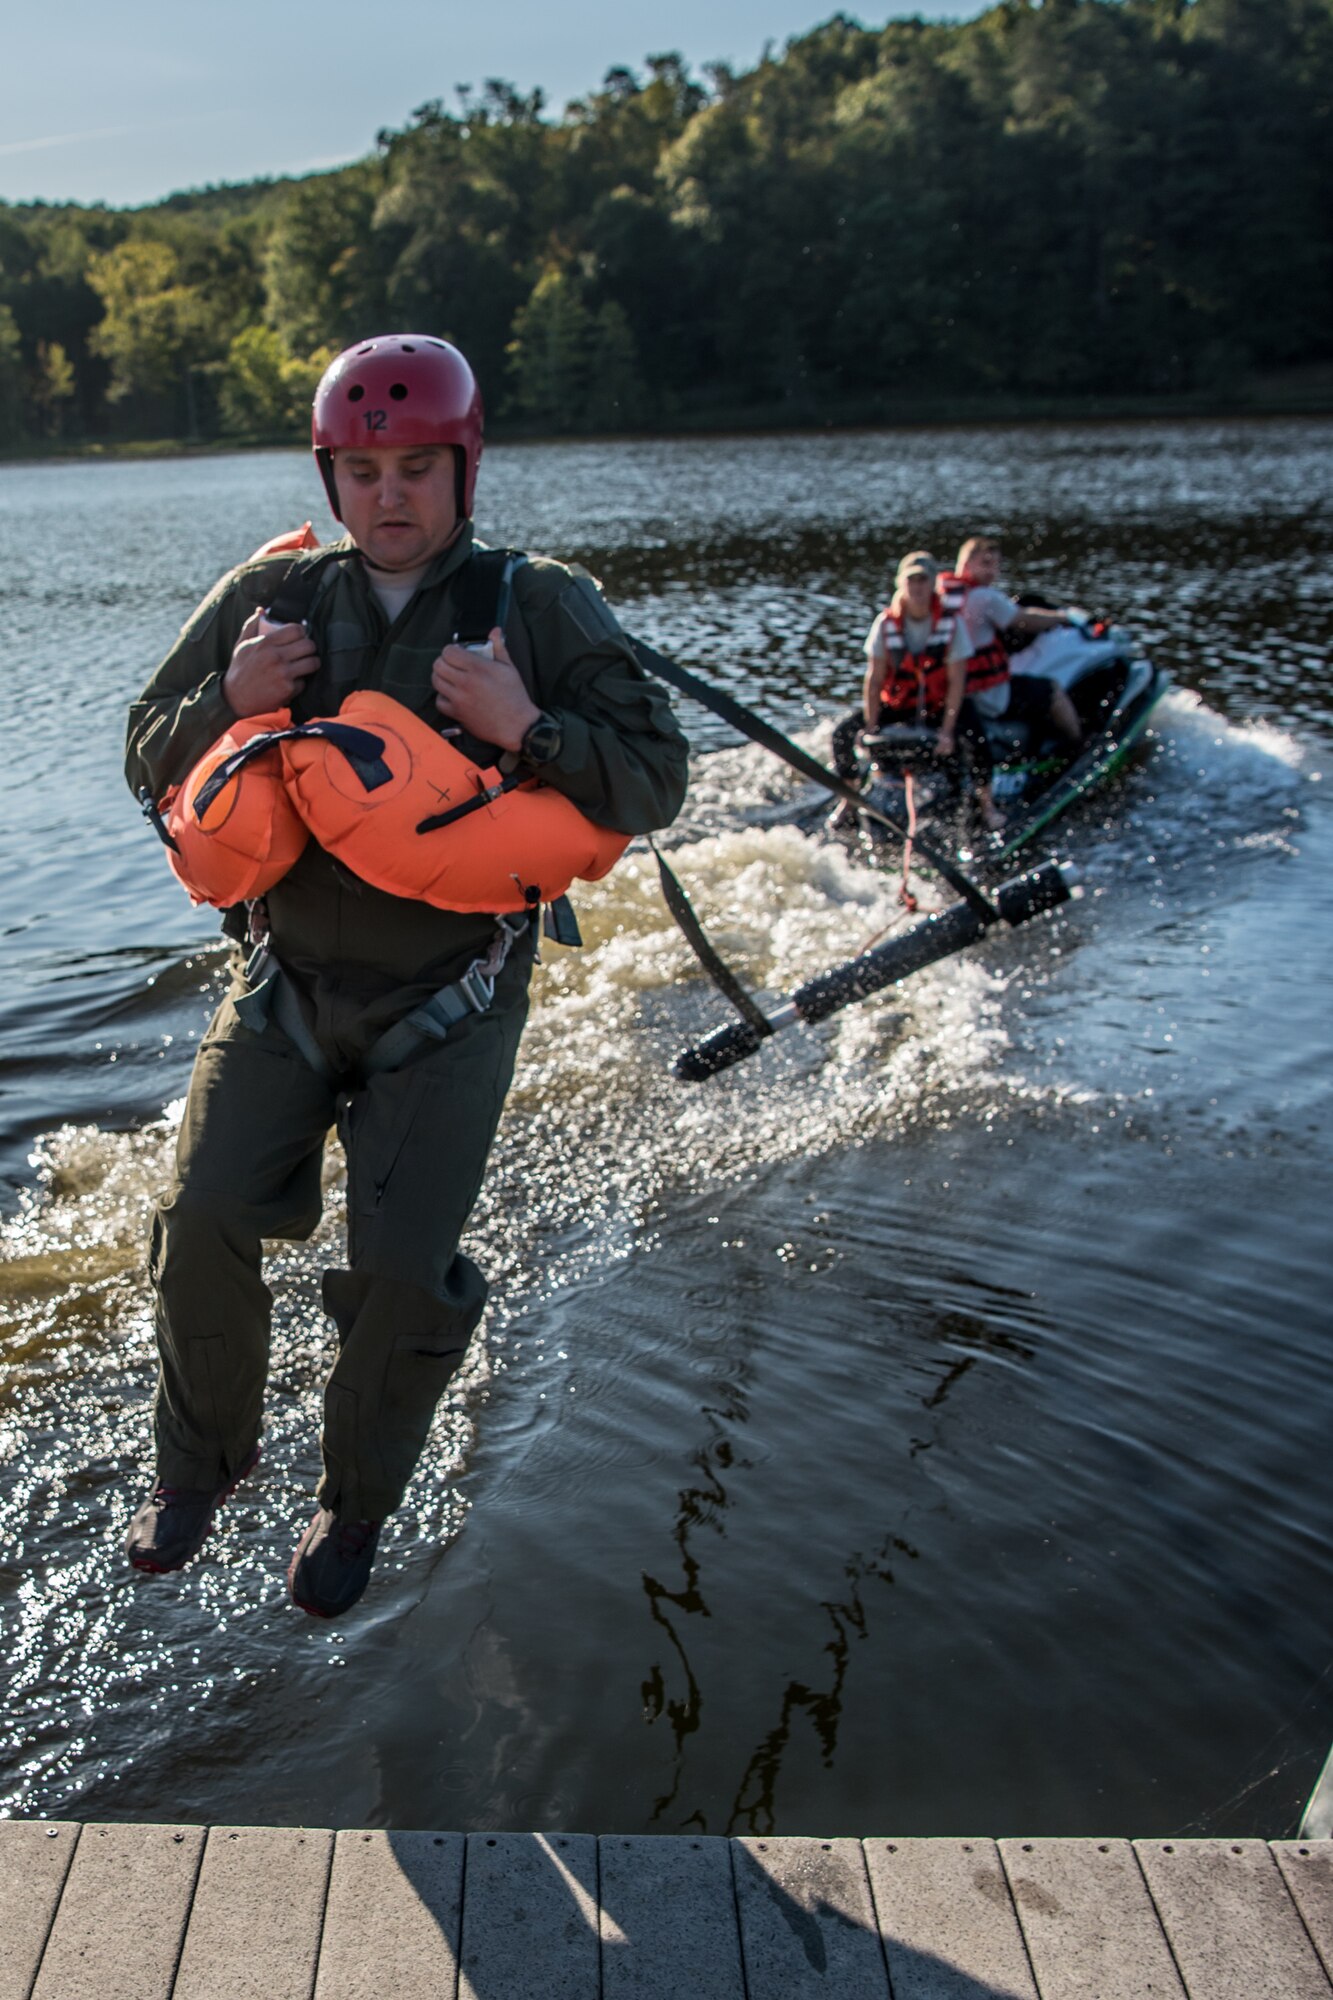 Tech. Sgt. Daniel Fuller, a loadmaster for the Kentucky Air National Guard’s 165th Airlift Squadron, is pulled across the water at Camp Crooked Creek in Shepherdsville, Ky., Sept. 14, 2019, by a personal watercraft as part of routine survival training. The exercise is designed to simulate what could happen to aircrew members who’ve parachuted into water when the wind catches their open chutes and drags them across the surface, posing the risk of drowning. (U.S. Air National Guard photo by Staff Sgt. Joshua Horton)